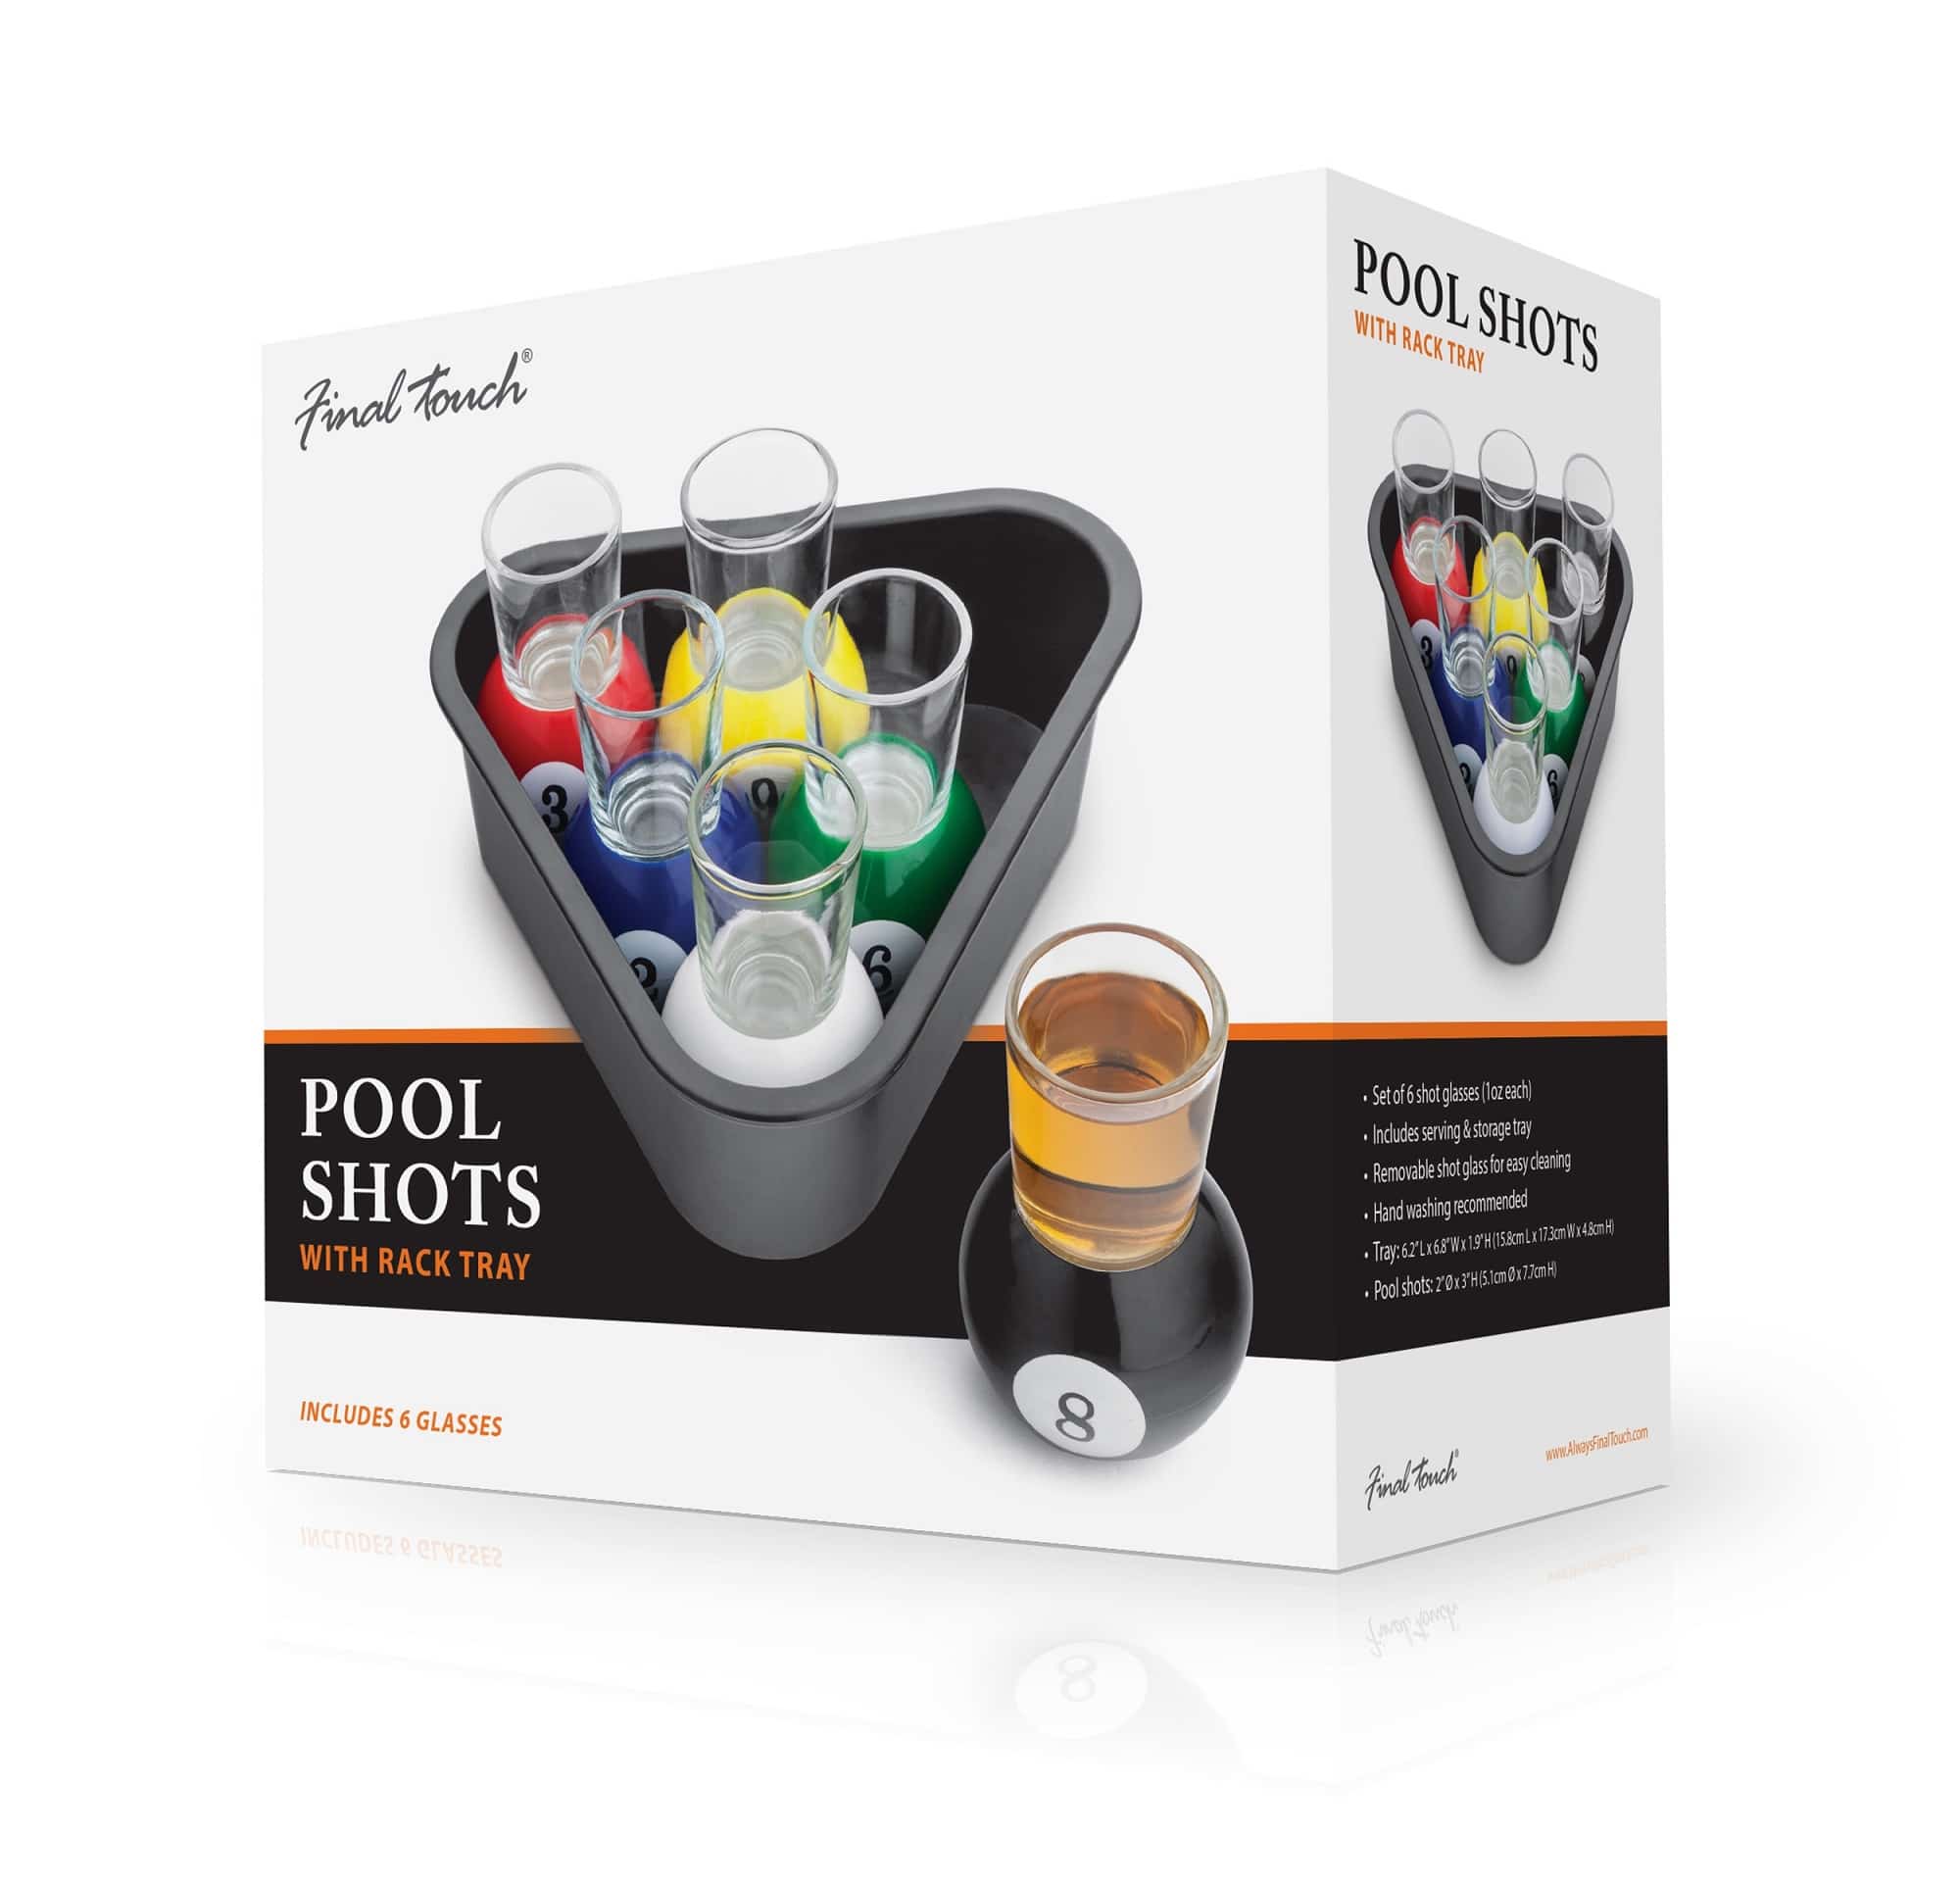 Final Touch Novelty Pool Shot Glasses Set Of 6